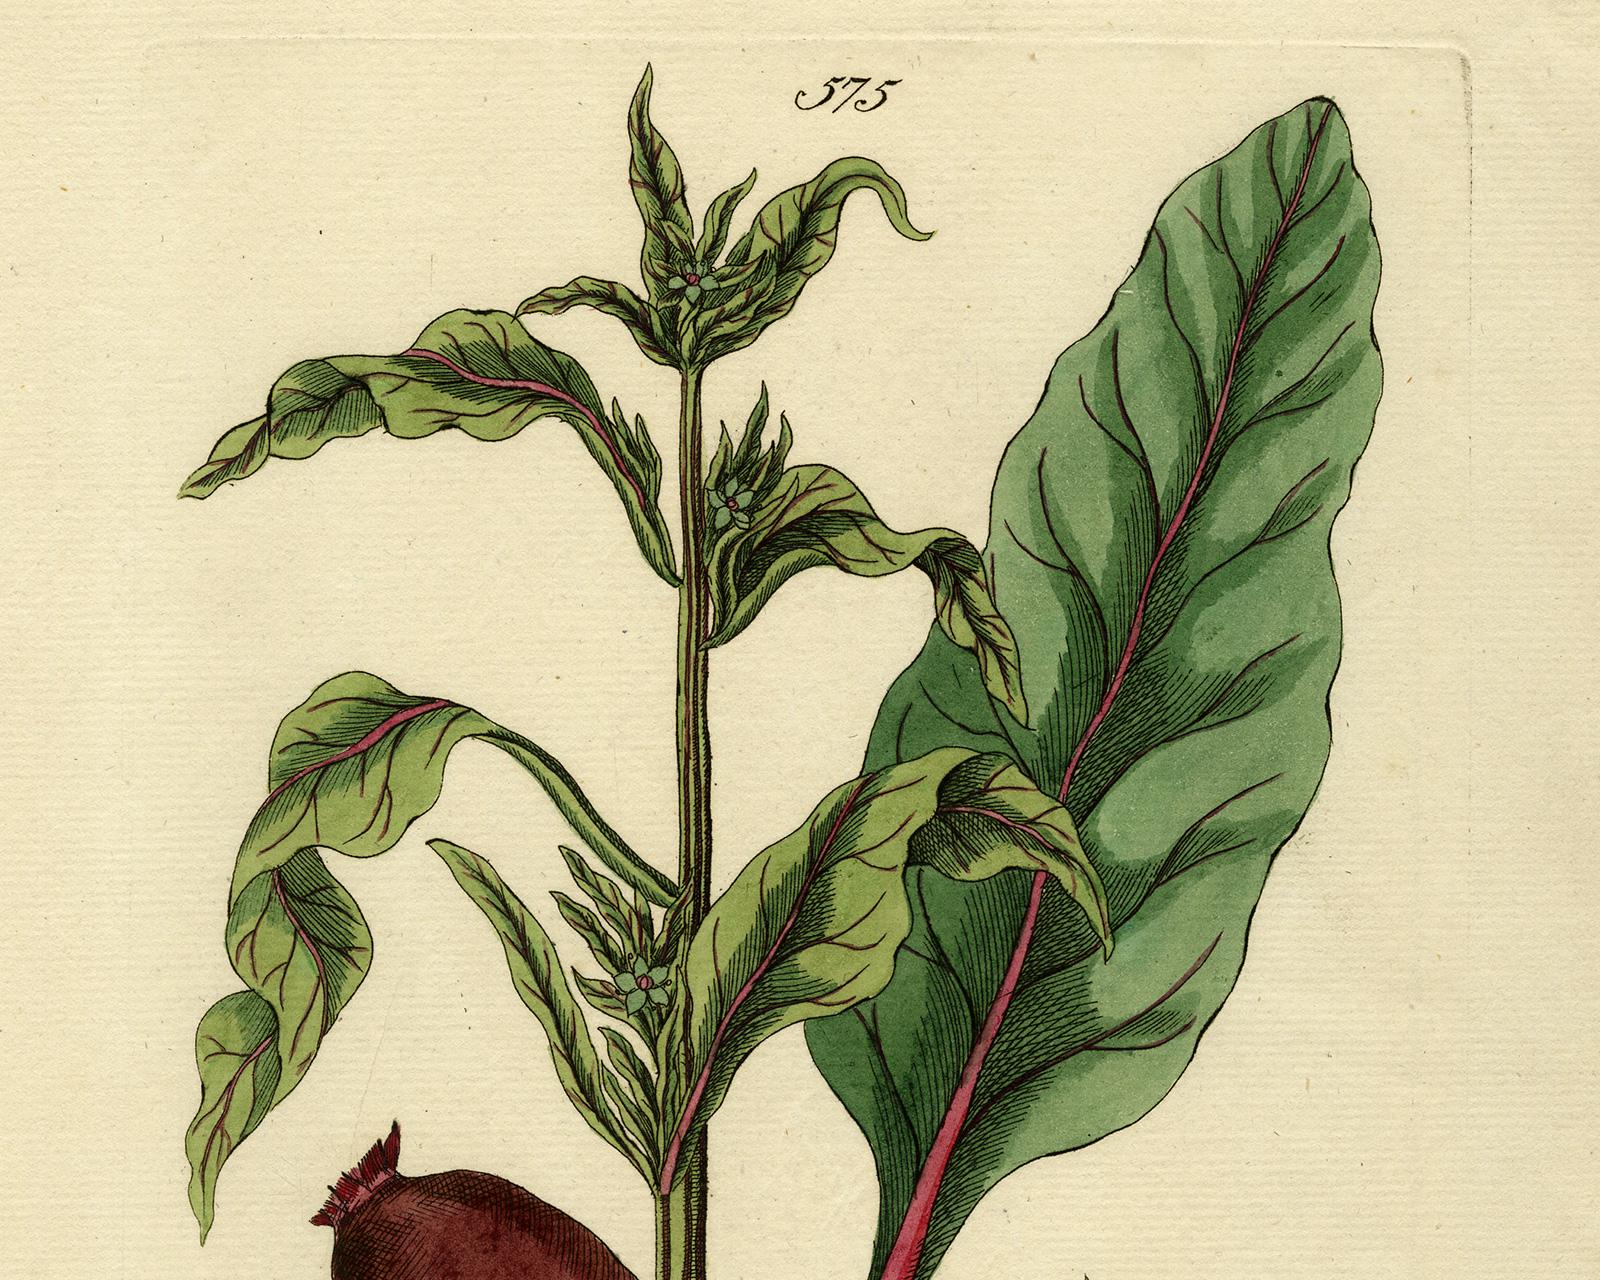 Beet from Medicinal Plants by Happe - Handcoloured engraving - 18th century - Old Masters Print by Andreas Friedrich Happe